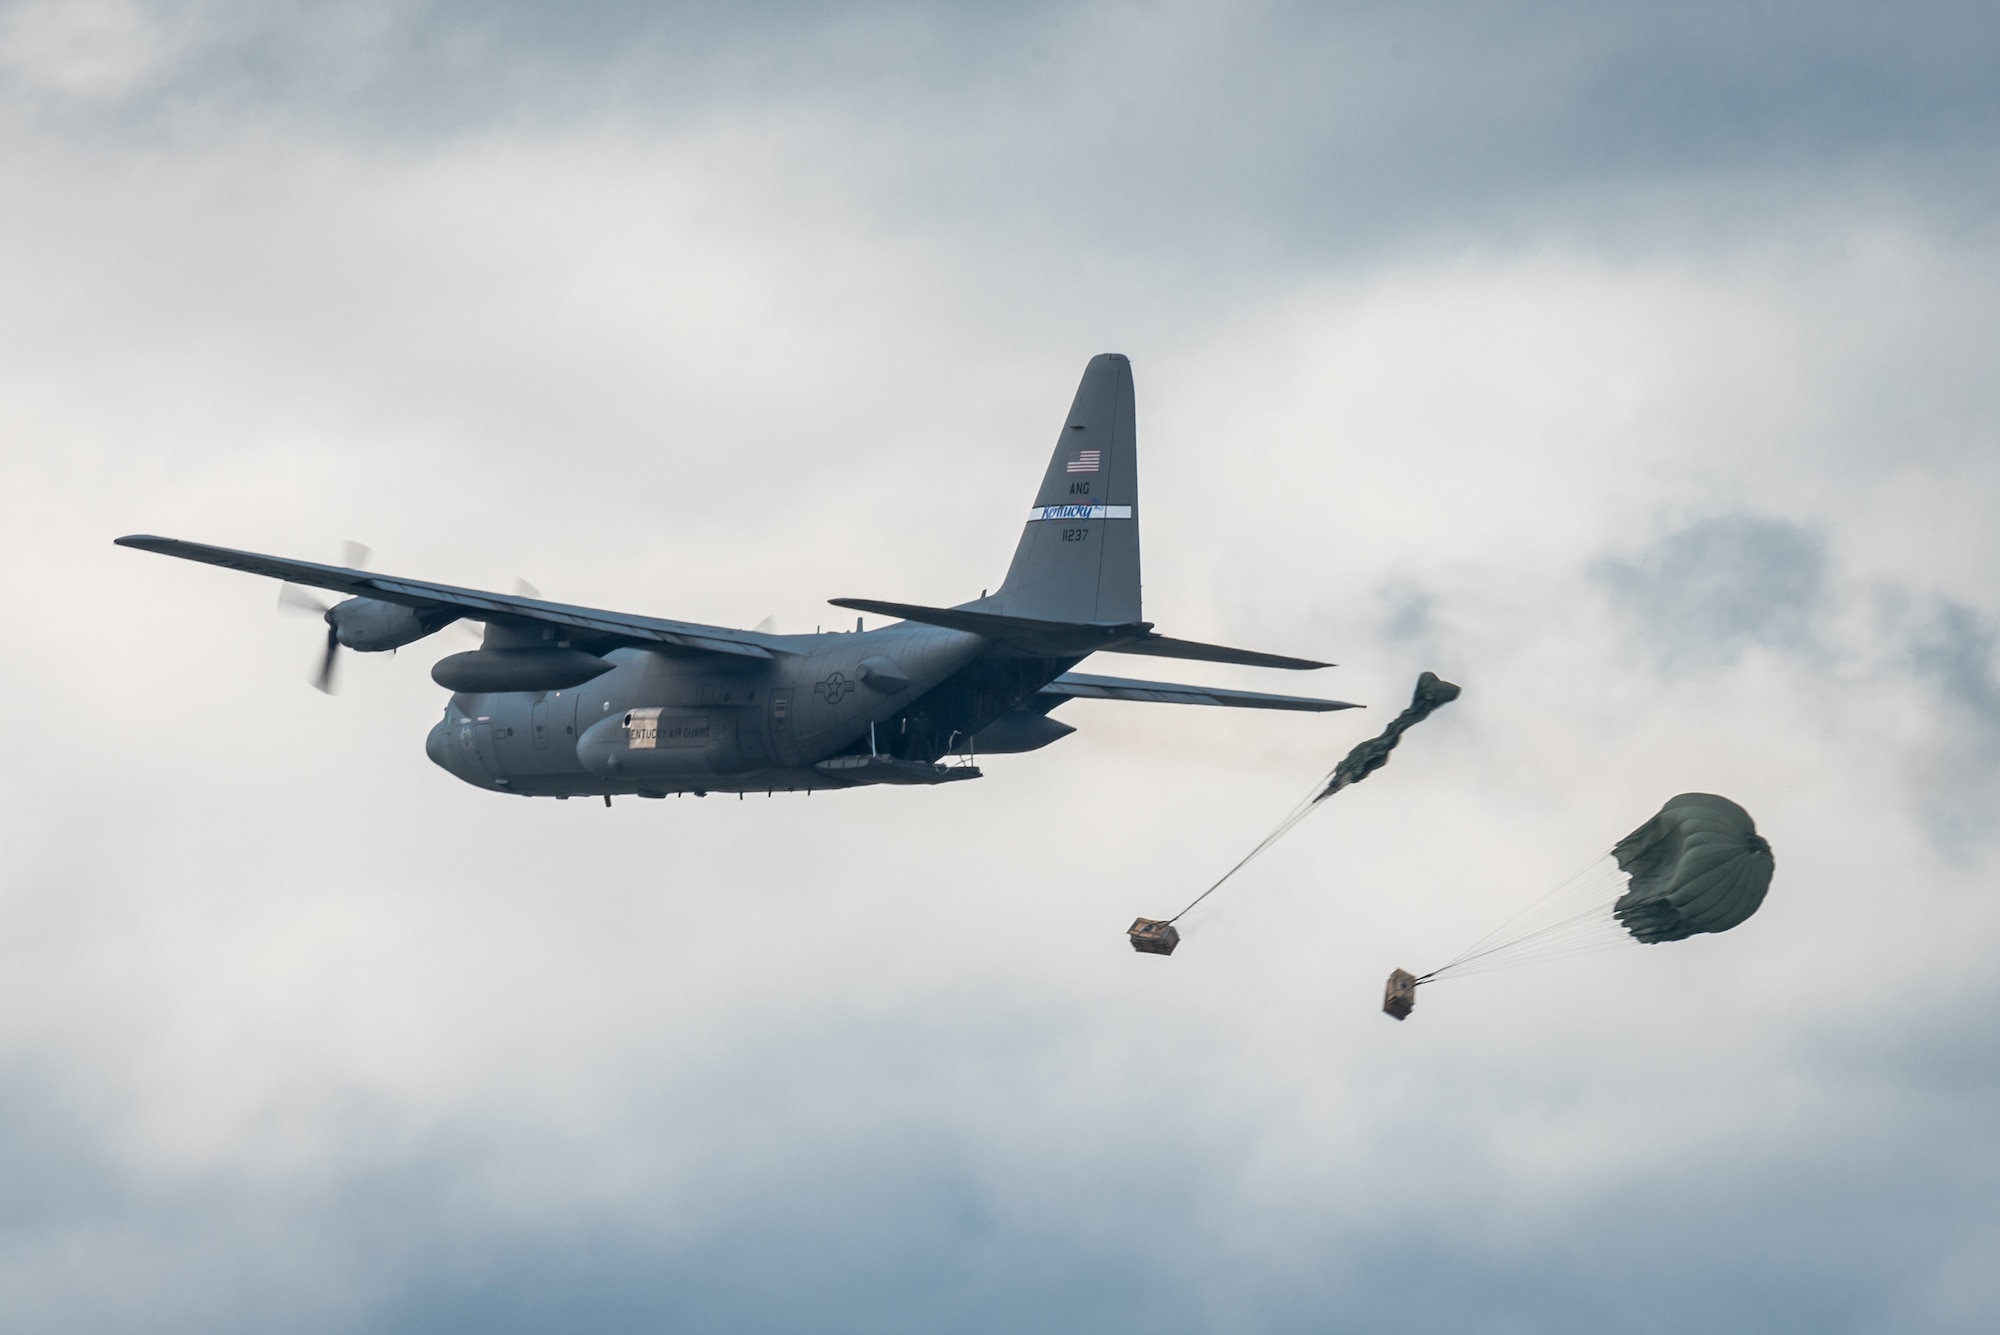 A C-130 Hercules aircraft from the Kentucky Air National Guard’s 123rd Airlift Wing air-drops two bundles of cargo in the Ohio River during the Thunder Over Louisville air show in Louisville, Ky., April 22, 2017. The unit will perform a similar demonstration during this year's Thunder, which annual has grown to become the largest single-day air show in the nation. (U.S. Air National Guard photo by Lt. Col. Dale Greer)